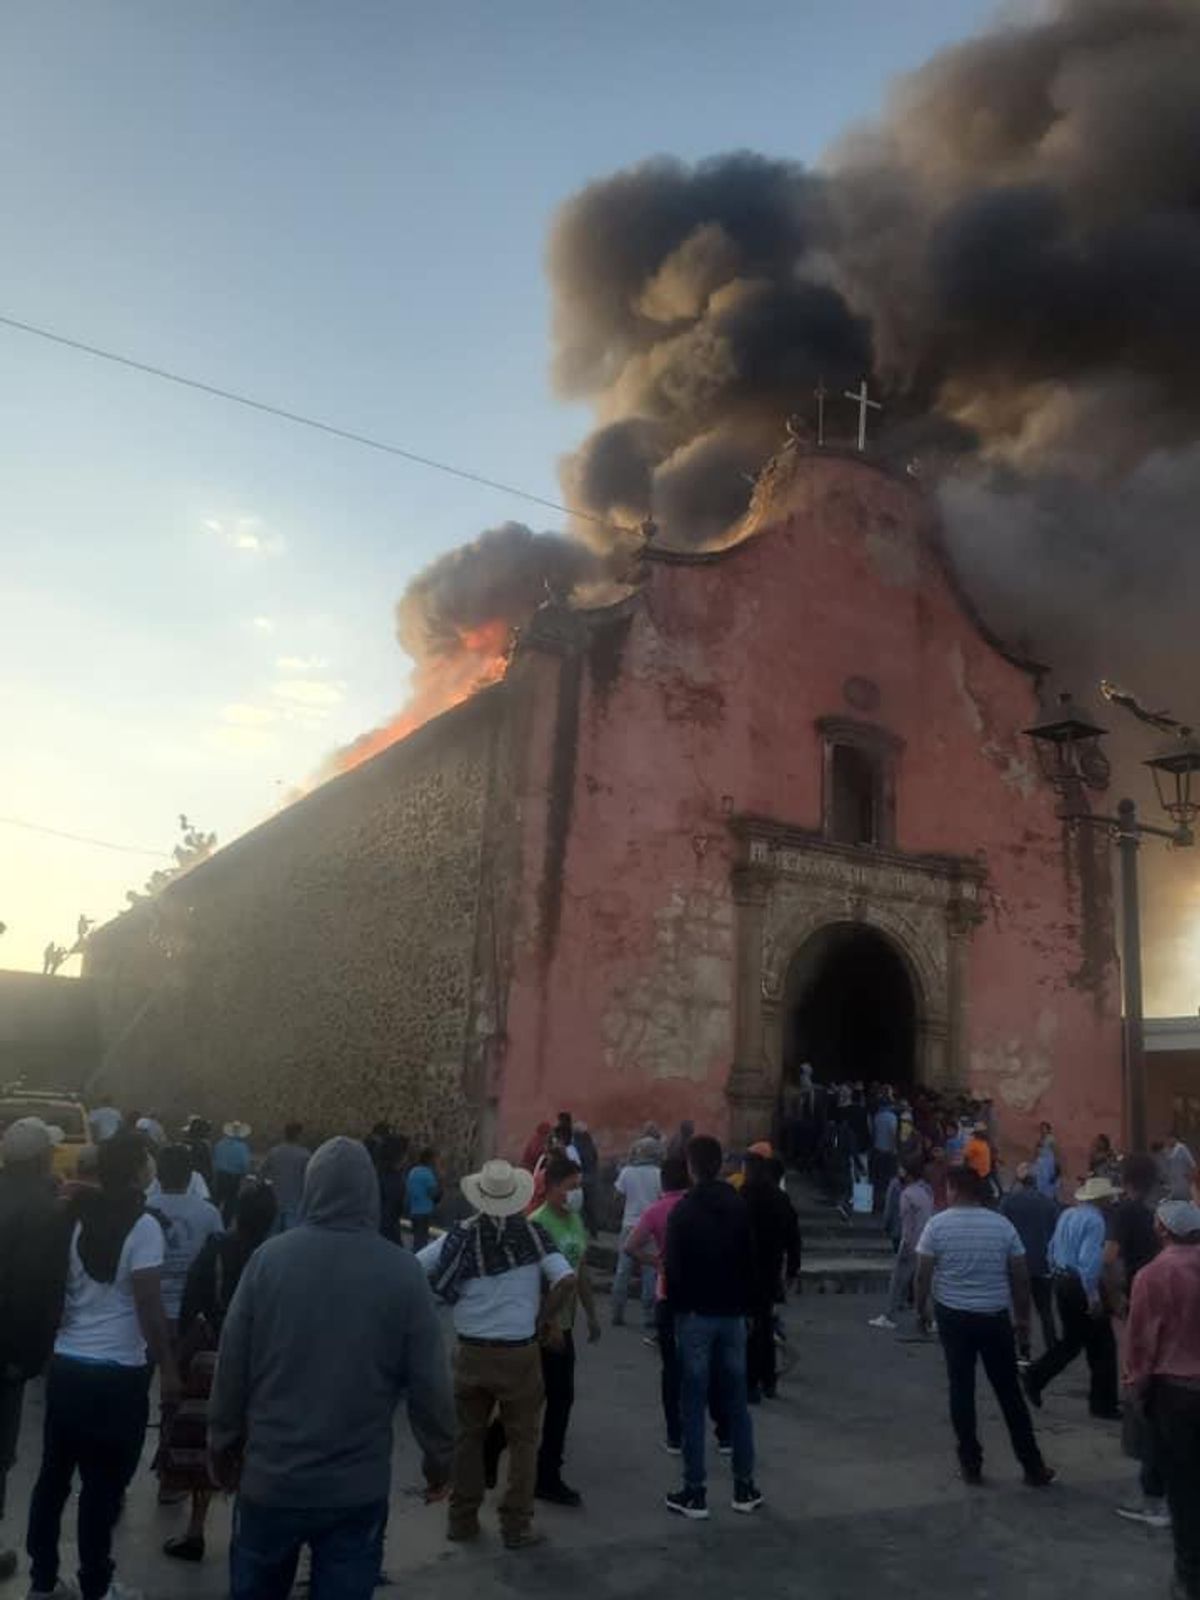 A fire that broke at St James the Apostle church in Nurio, in the Mexican state of Michoacán, last week destroyed the building's interior 